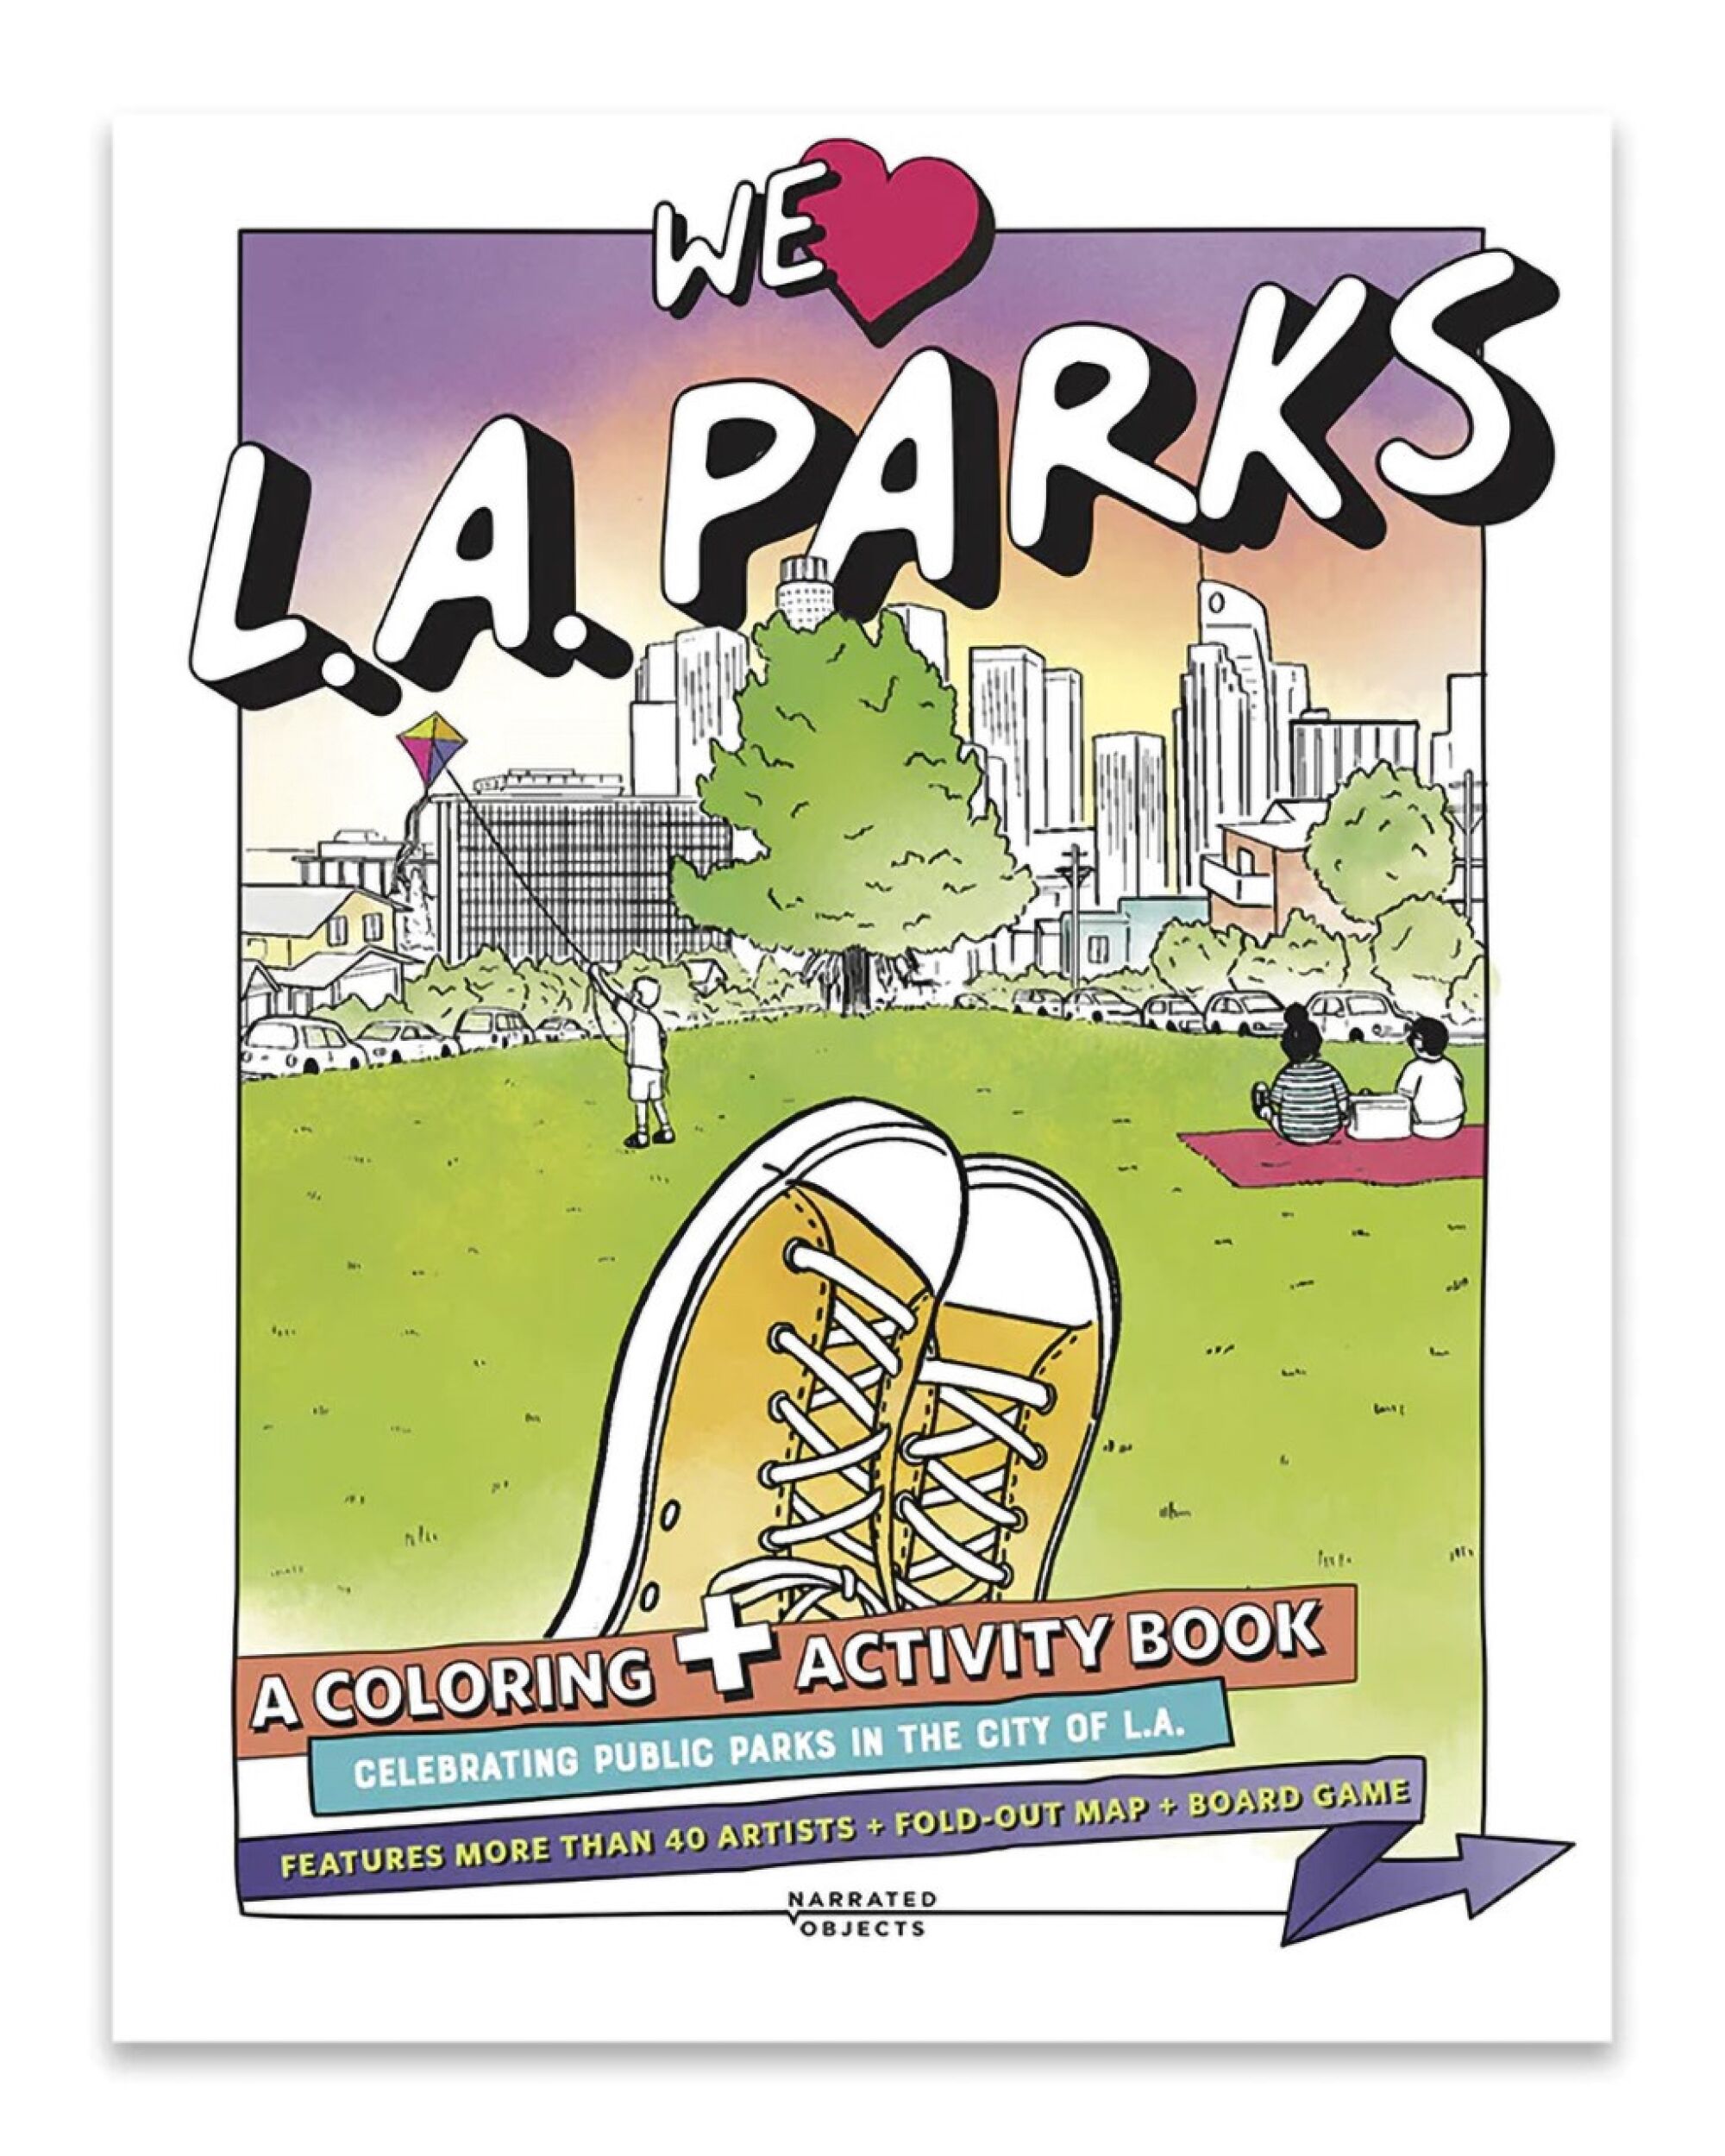 The We Heart L.A. Parks Coloring Book by Leanna Lin's Wonderland